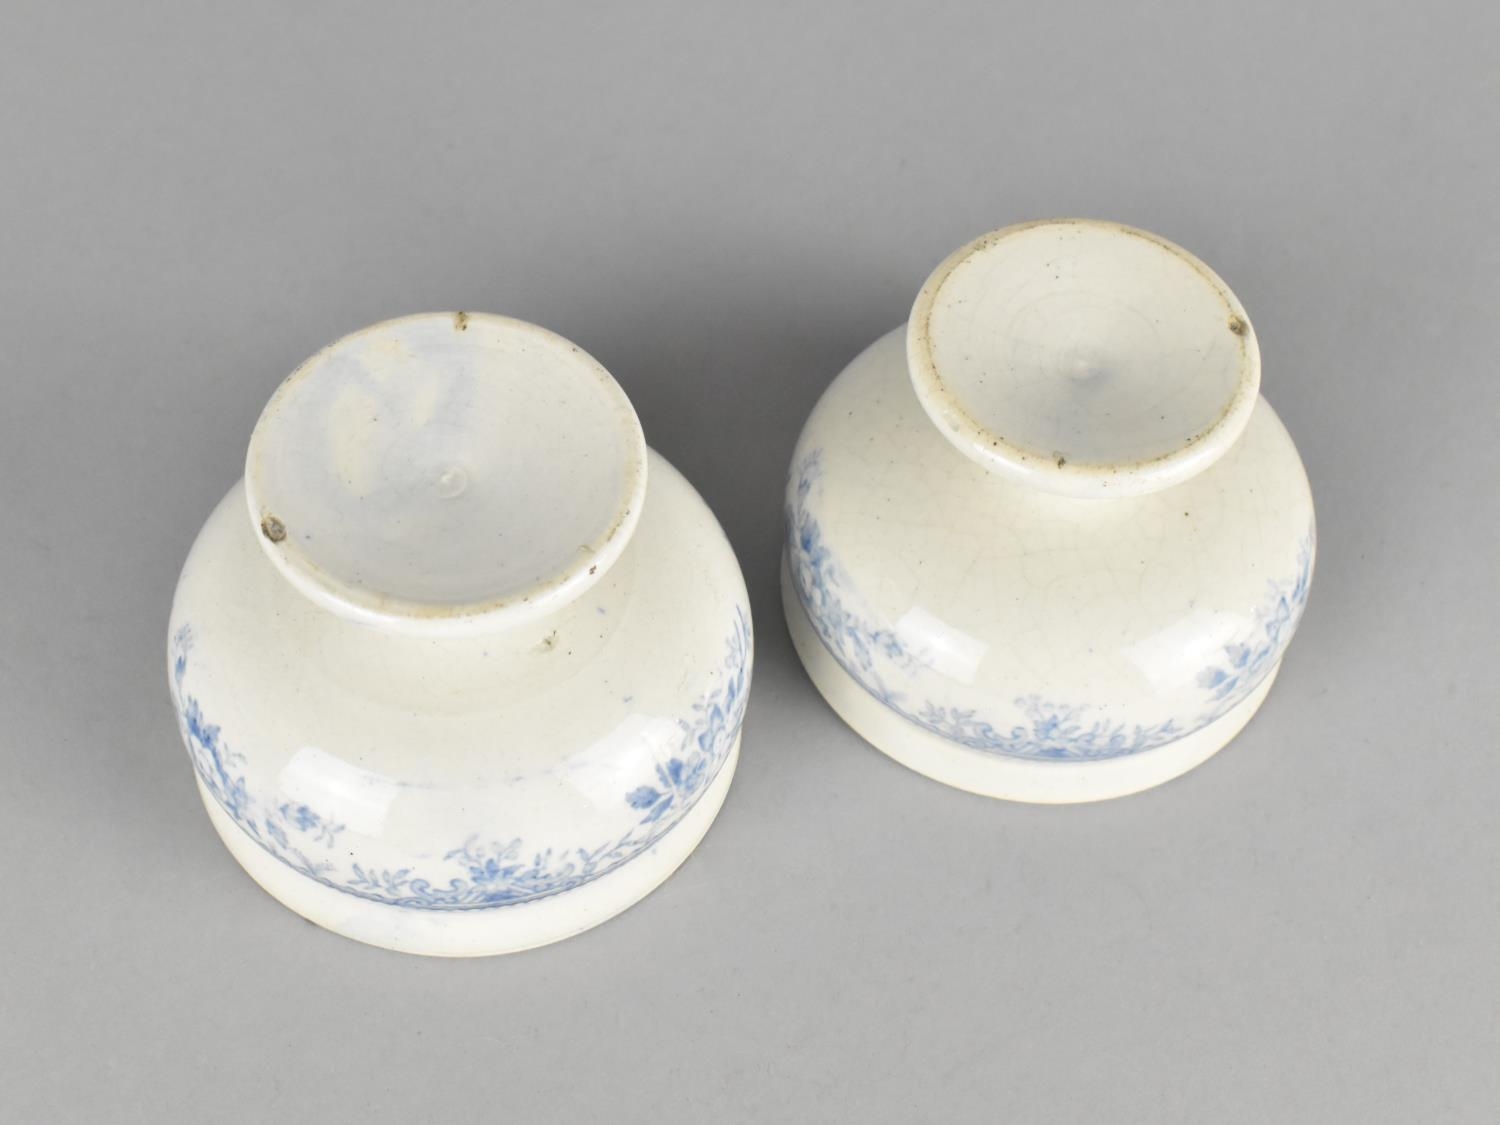 A Pair of 19th Century English Pottery Blue and White Transfer Printed Salts, 6cm high - Image 2 of 2